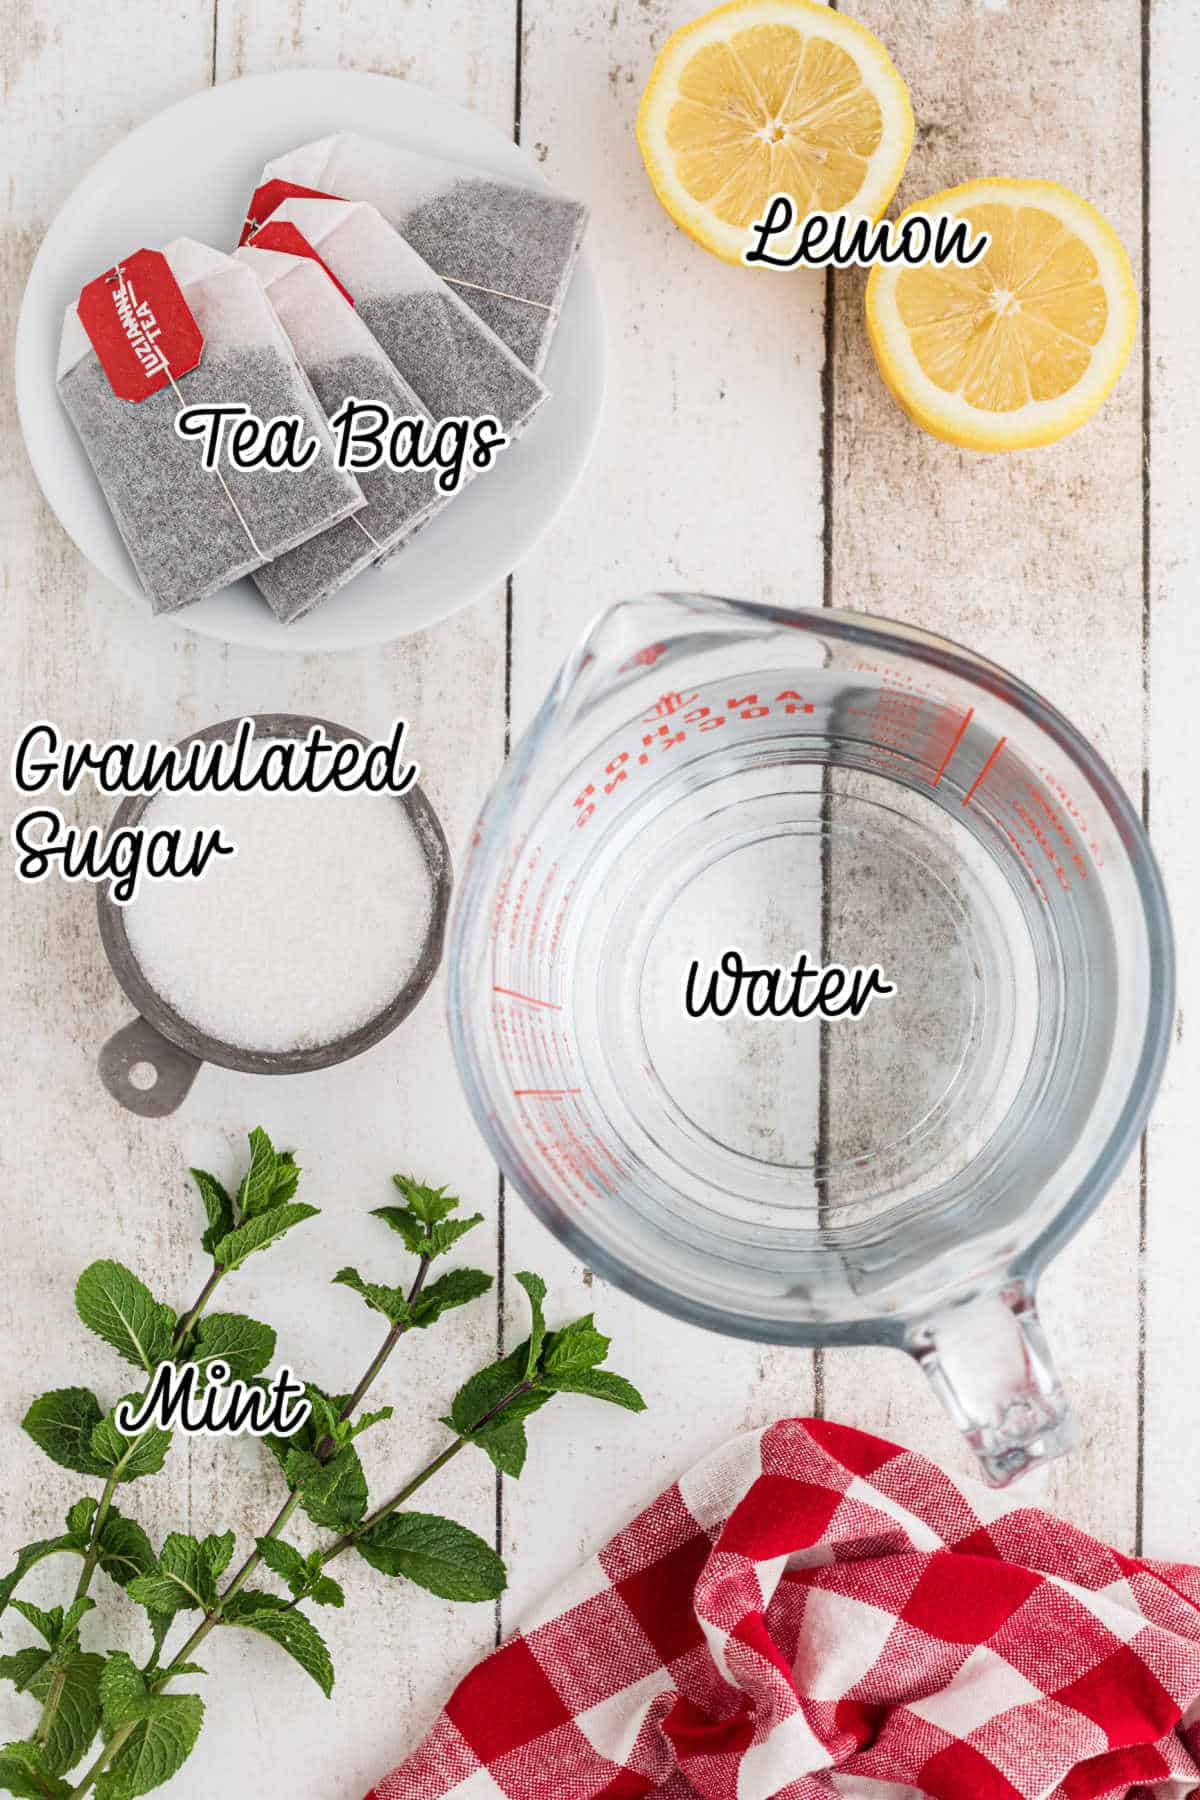 Overhead shot of ingredients laid out showing what you'll need to make southern sweet tea.